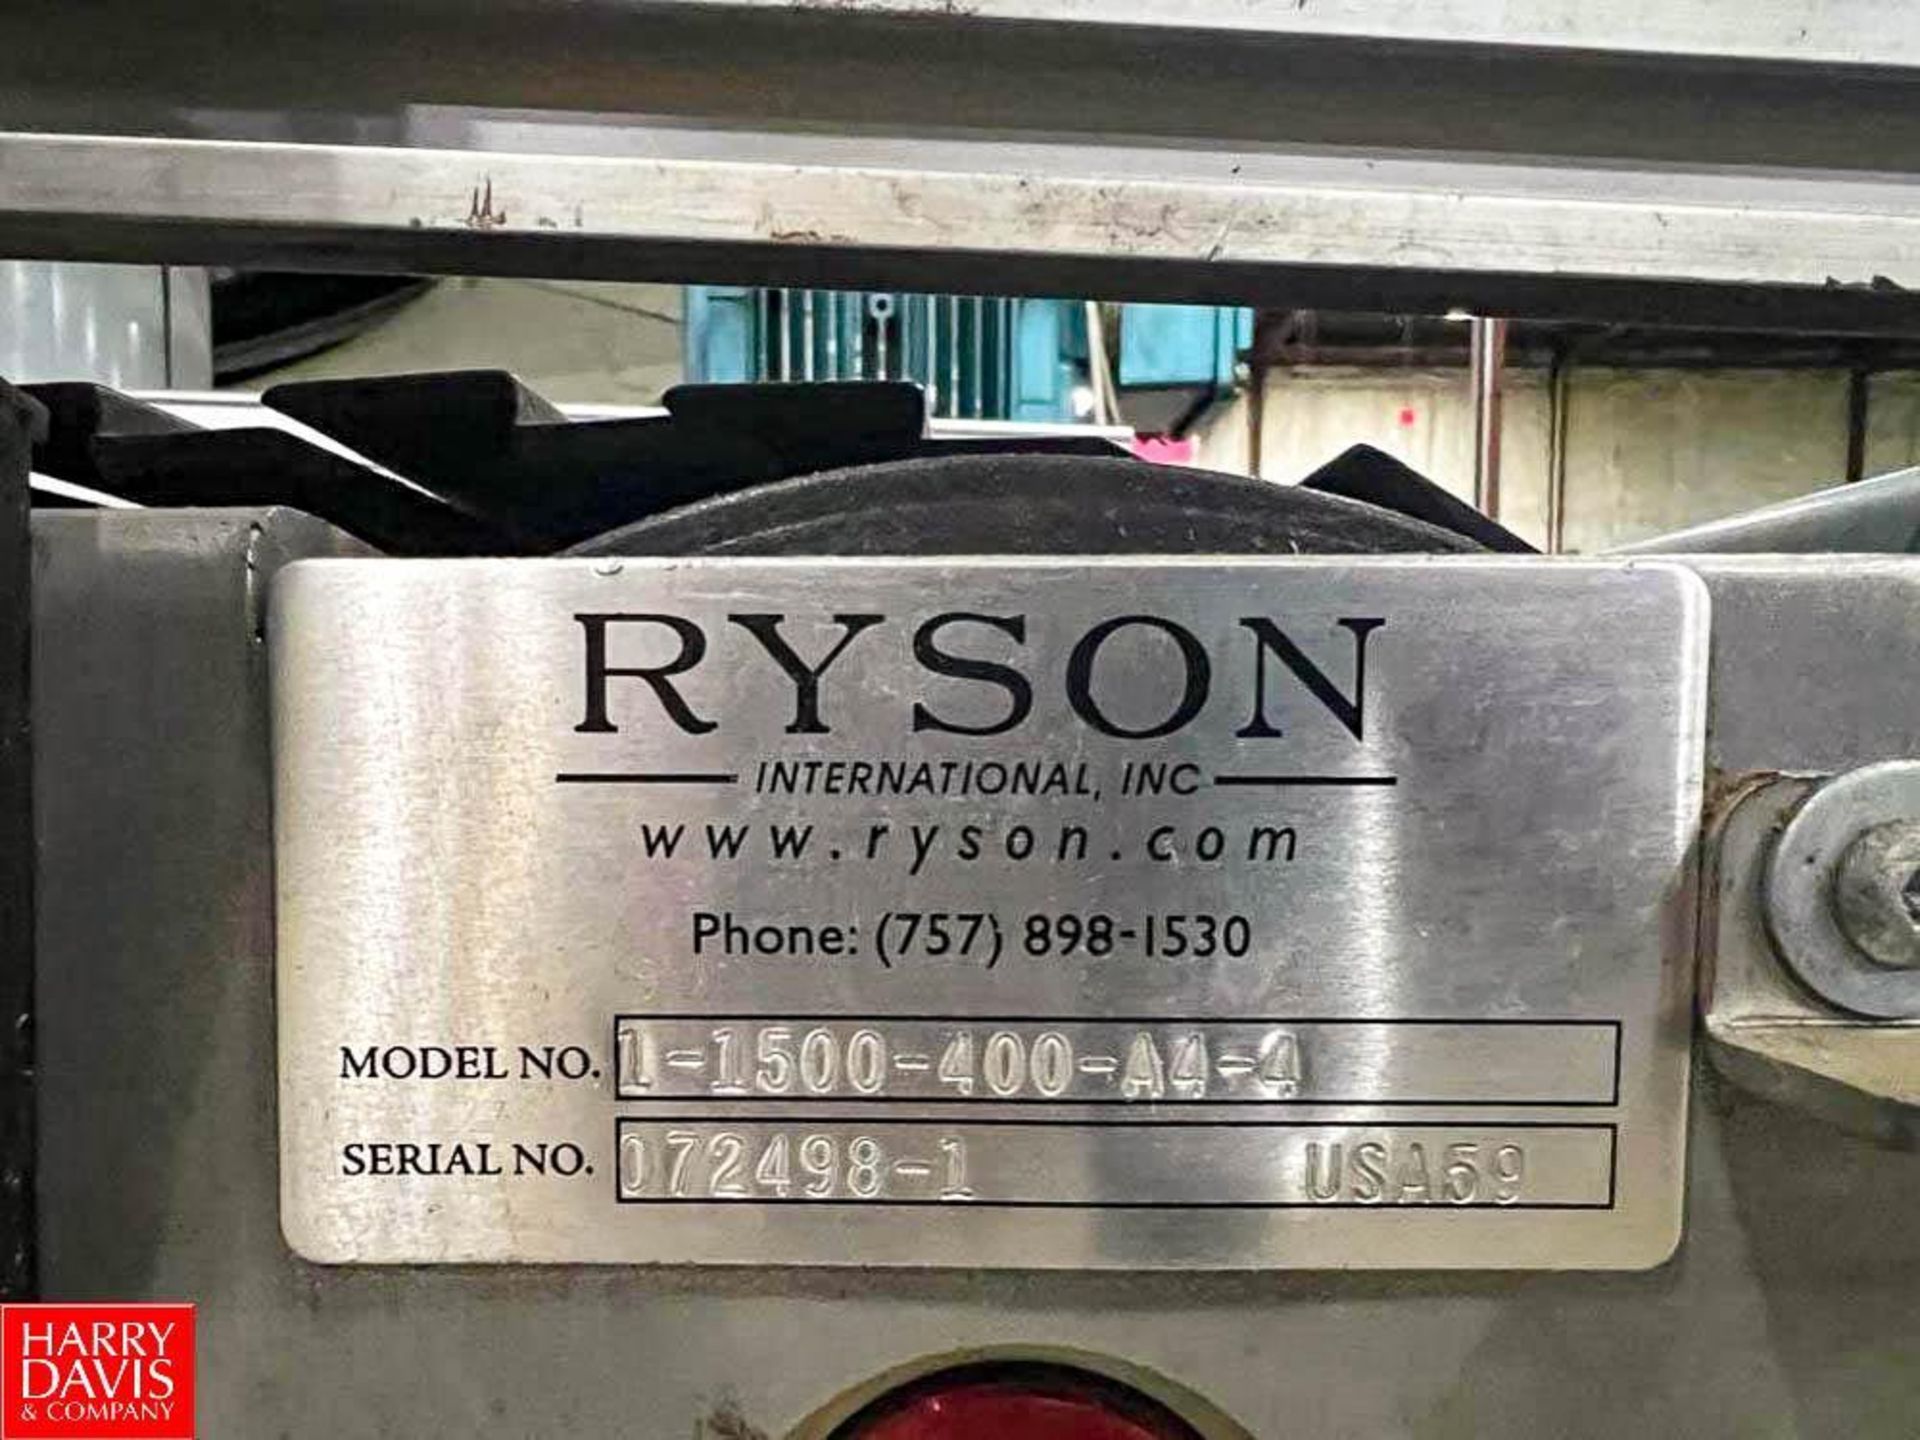 Ryson Spiral Elevator Conveyor, Model: 1-1500-400-A4-4, S/N: 072498-1, Dimensions = 16" Width - Rigg - Image 2 of 3